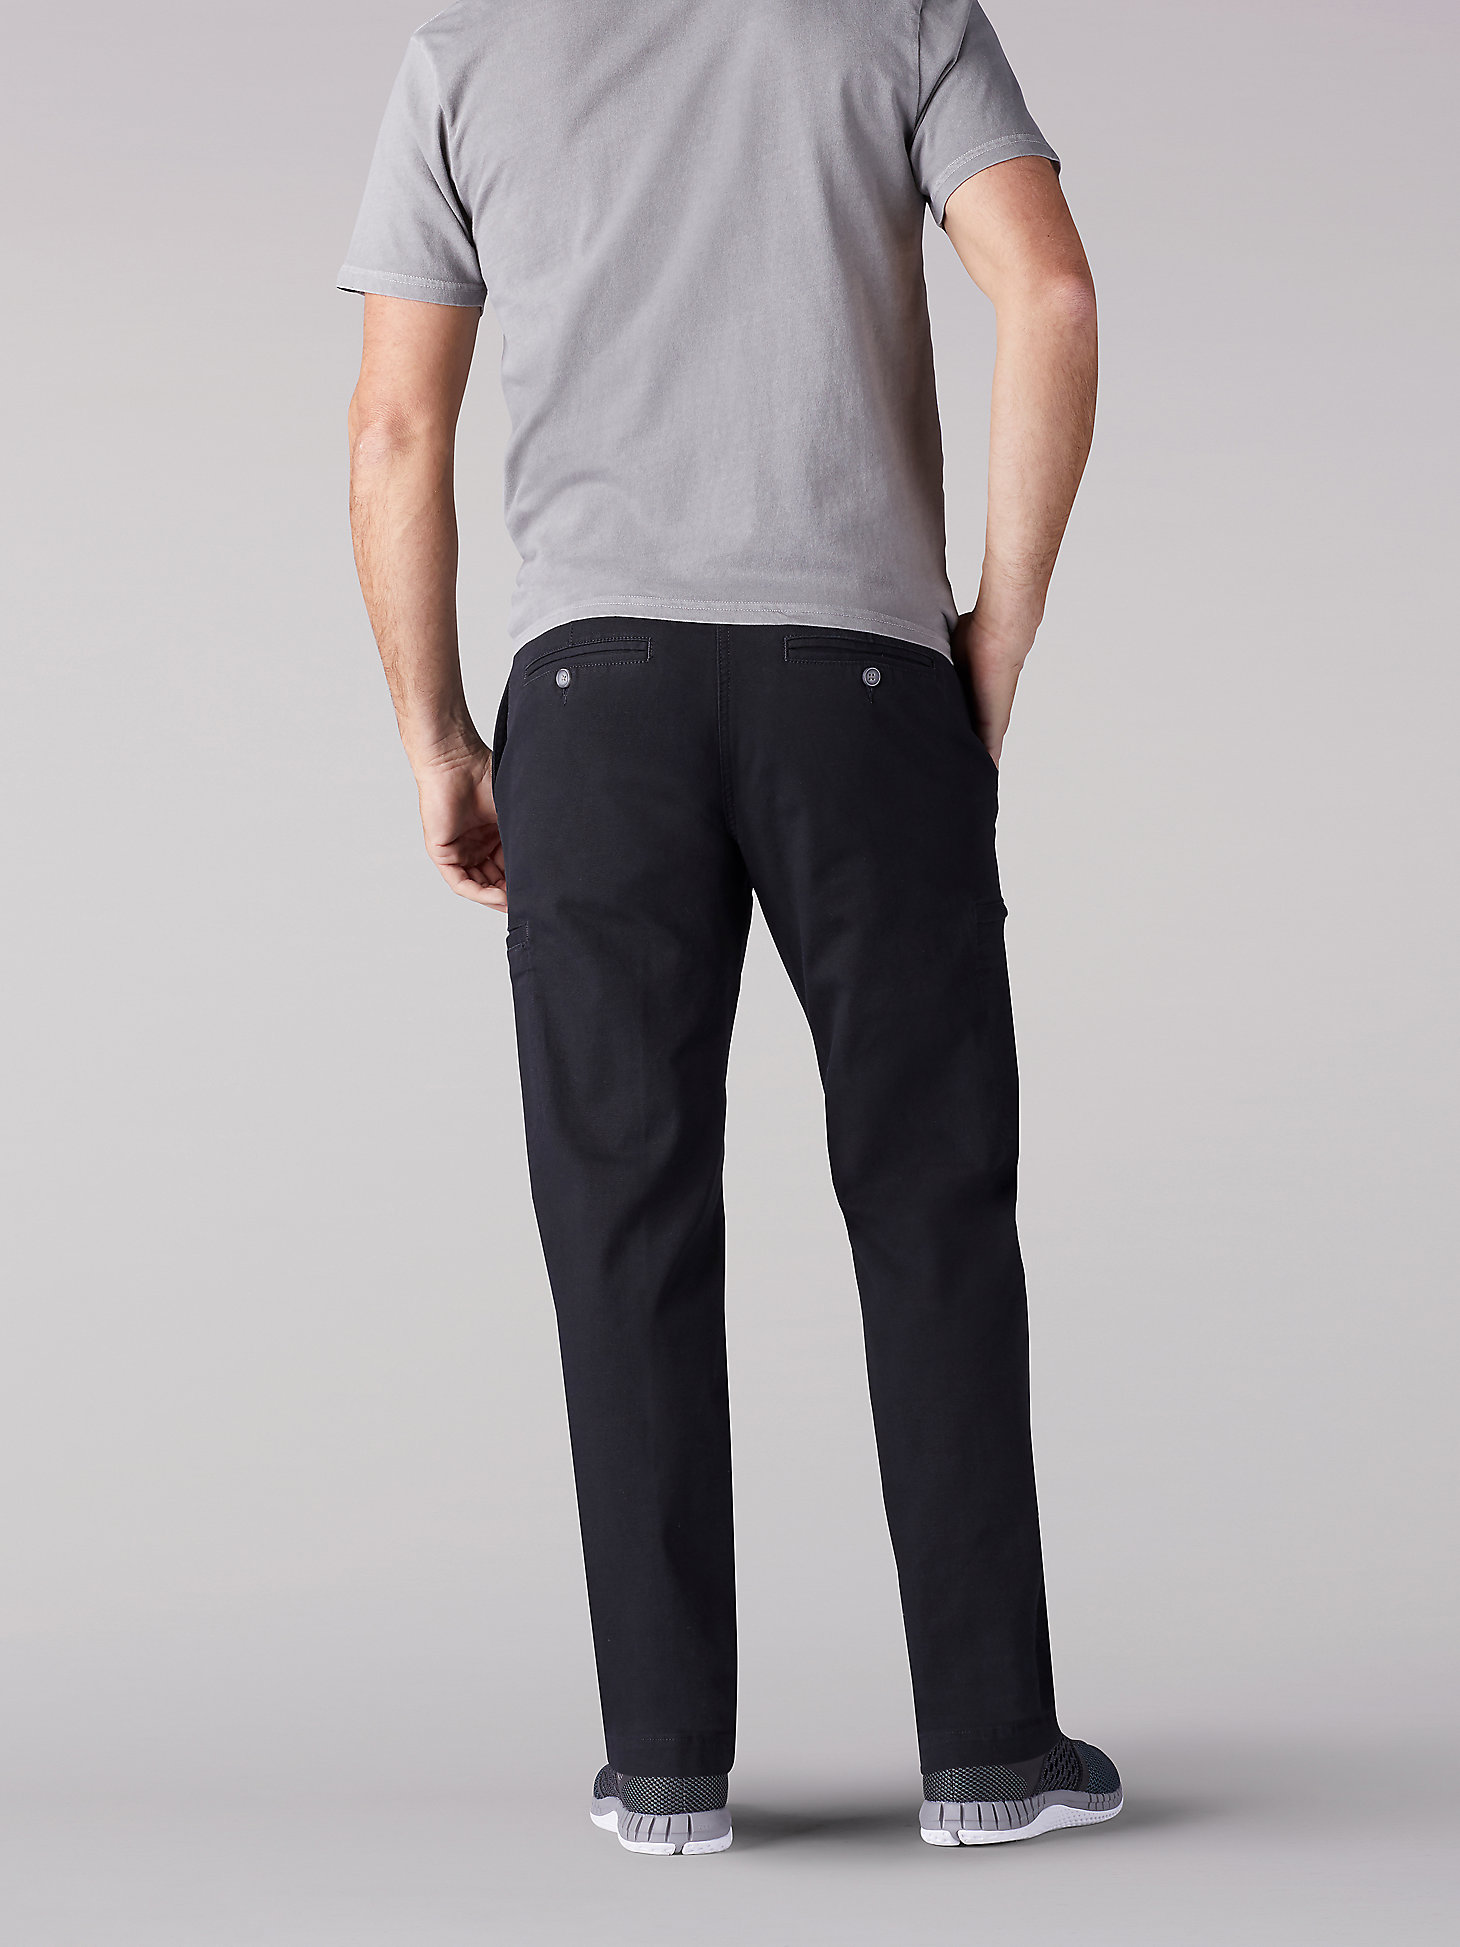 Men’s Extreme Comfort Straight Fit Cargo Pant (Big&Tall) in Black alternative view 1